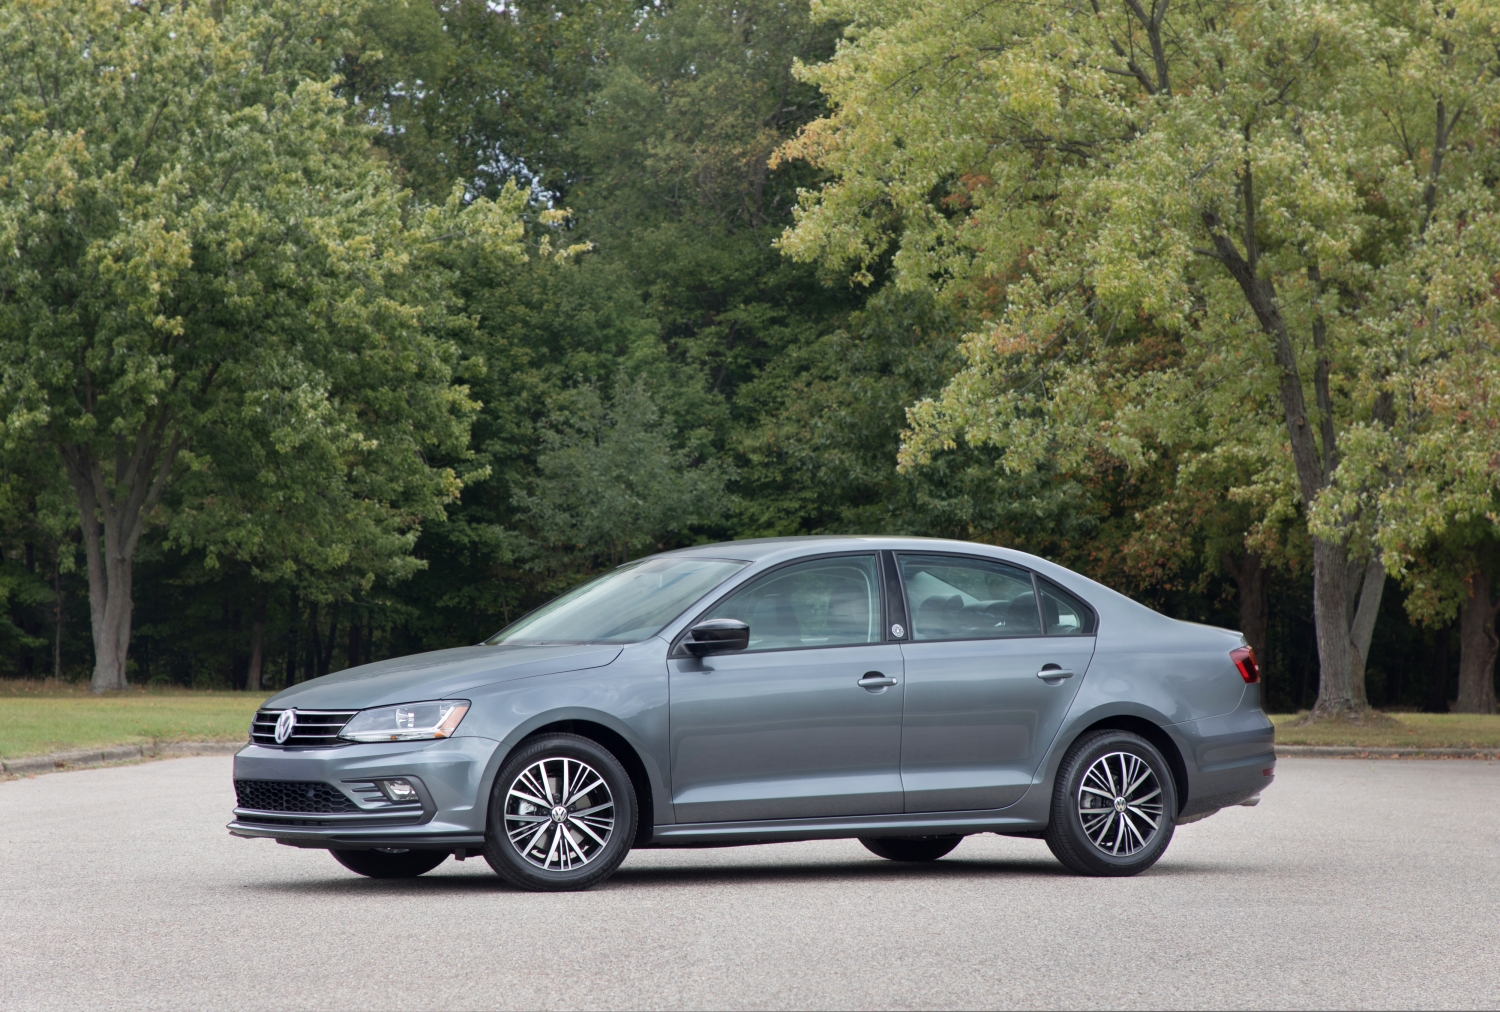 JD Power Names 2018 Jetta “Most Appealing” Compact